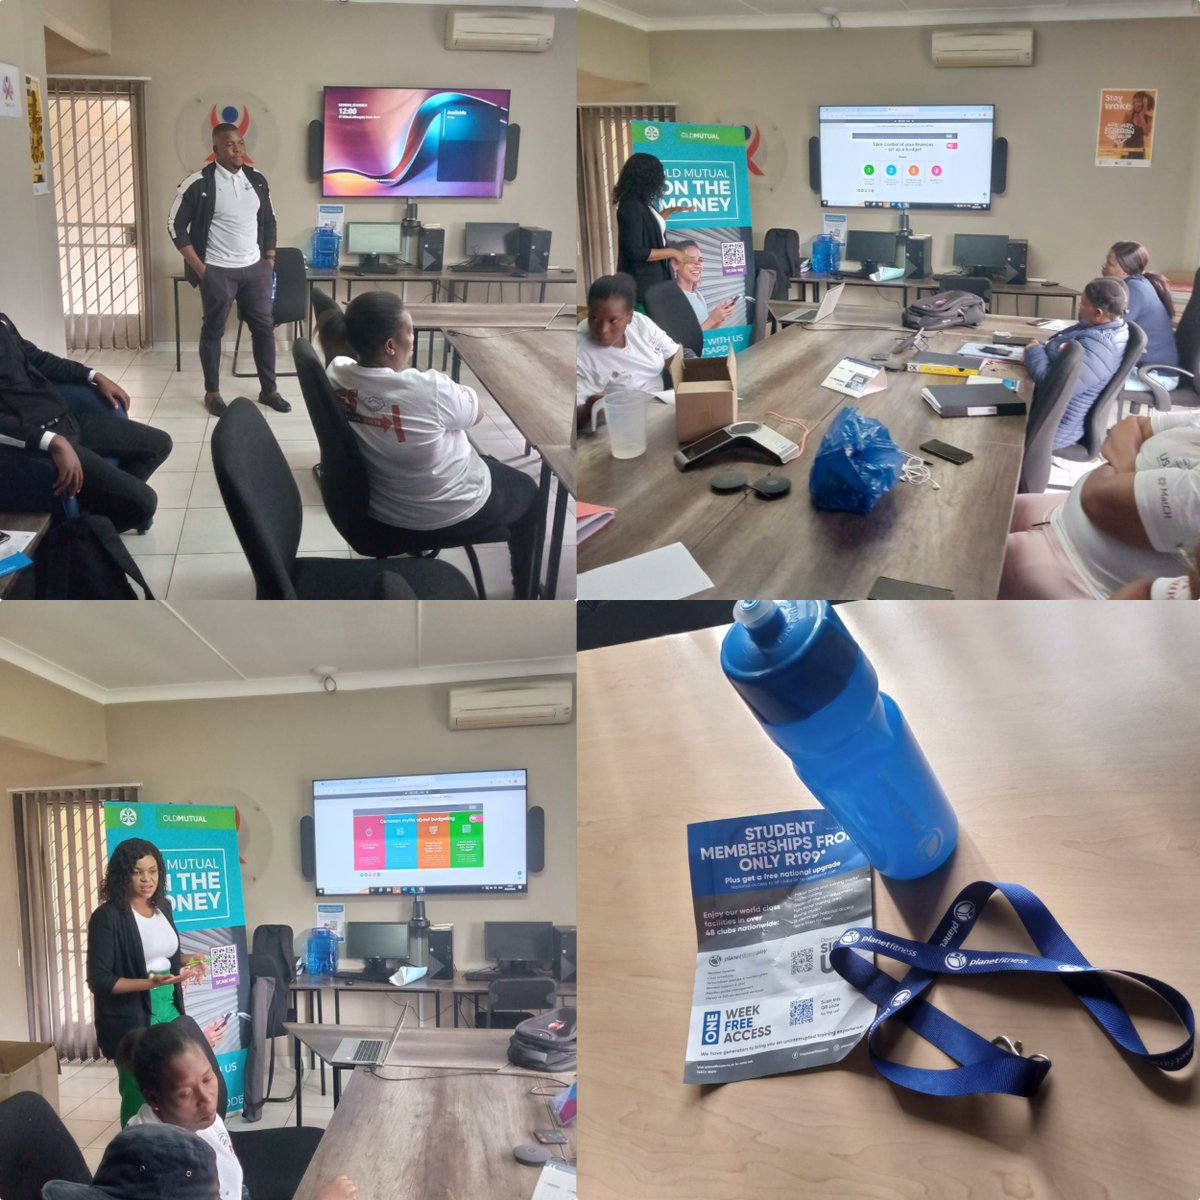 On 25 March, we held a Wellness Day for our Key Pops teams in Mpumalanga, coordinated by Siphokazi Mtyi, our Wellness Coordinator, where Old Mutual gave an in-depth presentation covering topics like budgeting, saving and investing. #Wellness #WorkLifeBalance @oldmutualsa